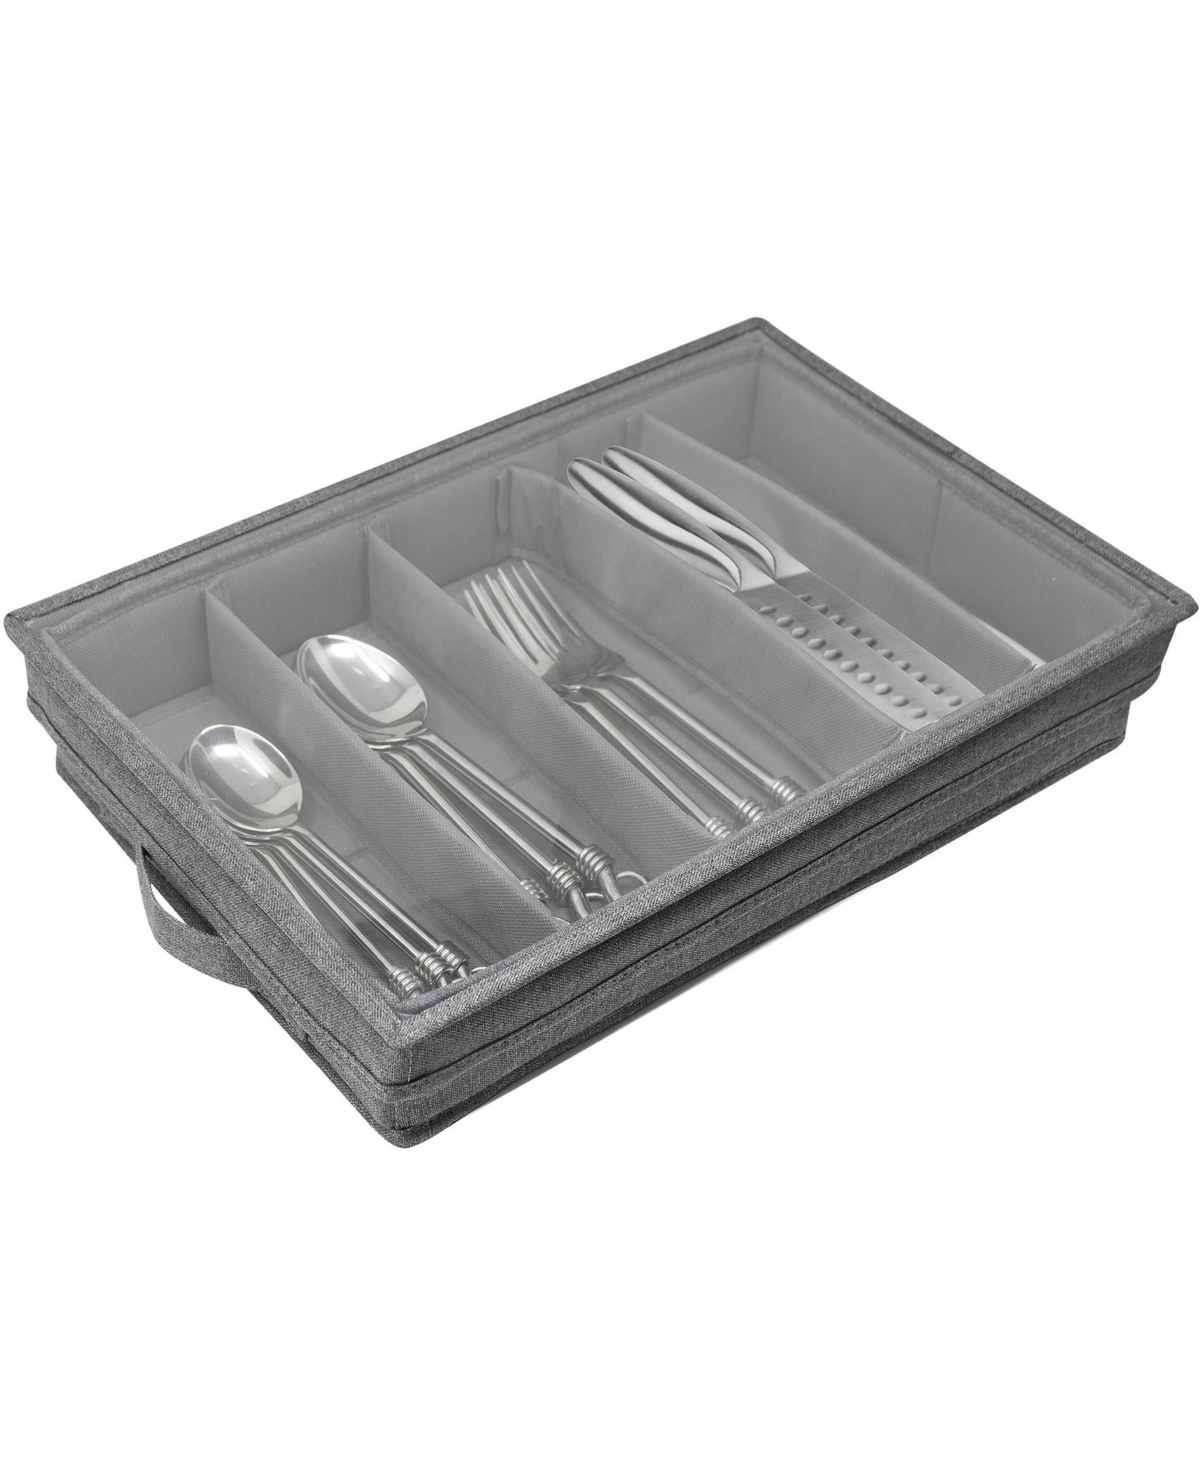 Cutlery Organizer with Lid - Gray